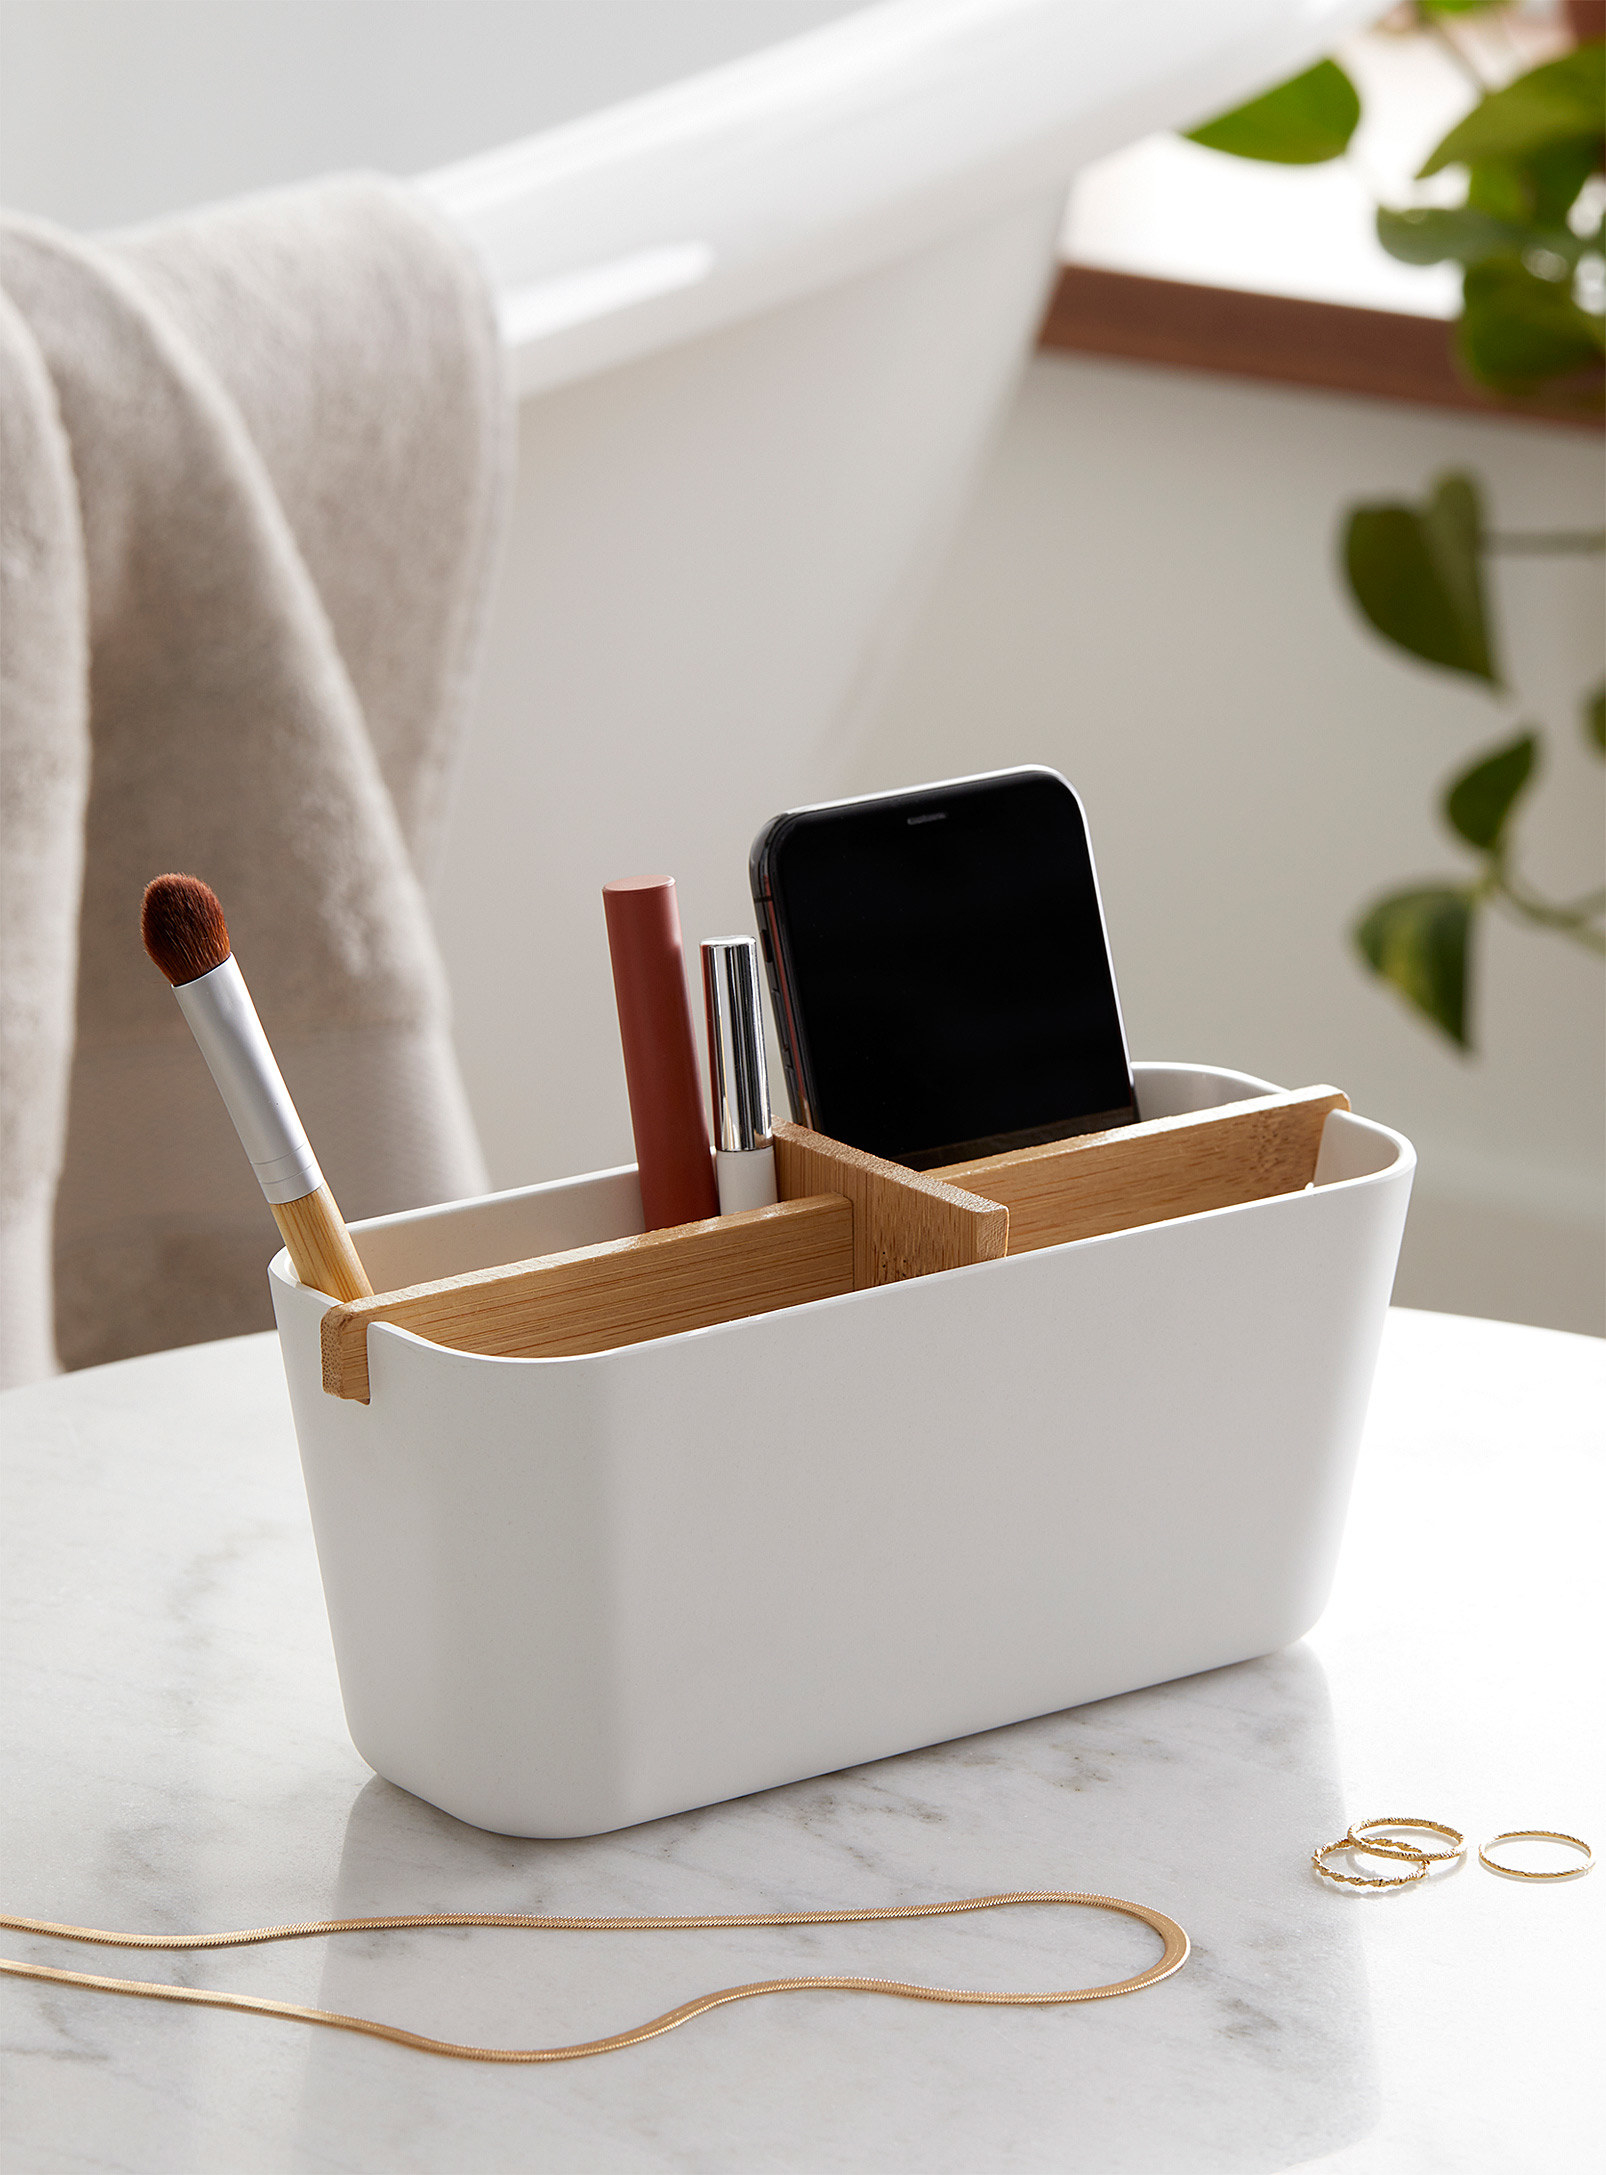 A small rectangular basket with makeup and a phone nestled inside